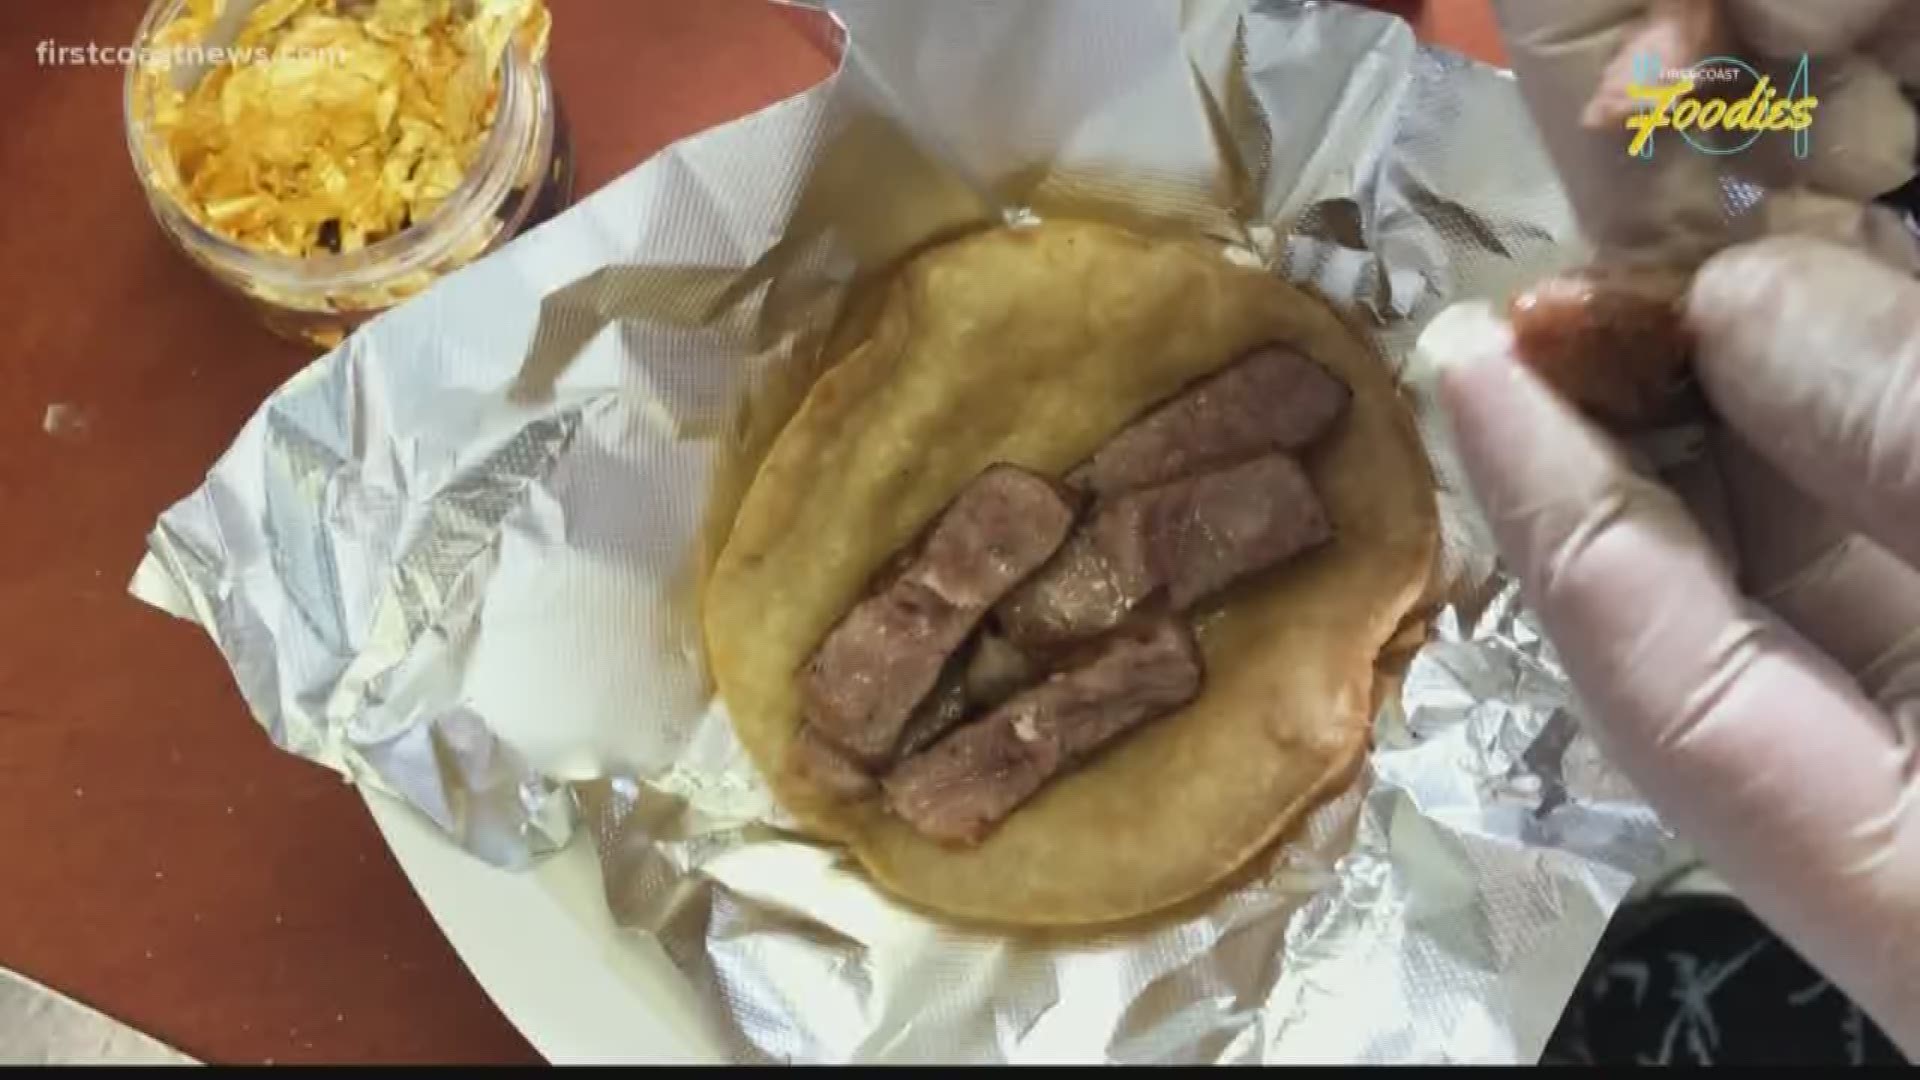 The taco, which is created by Taylor Tacos Food Truck, is made up of a white corn tortilla lightly fried in sesame oil, 2 oz. of A5 wagyu, black truffles, black-truffle Pecorino cheese and edible gold flakes.